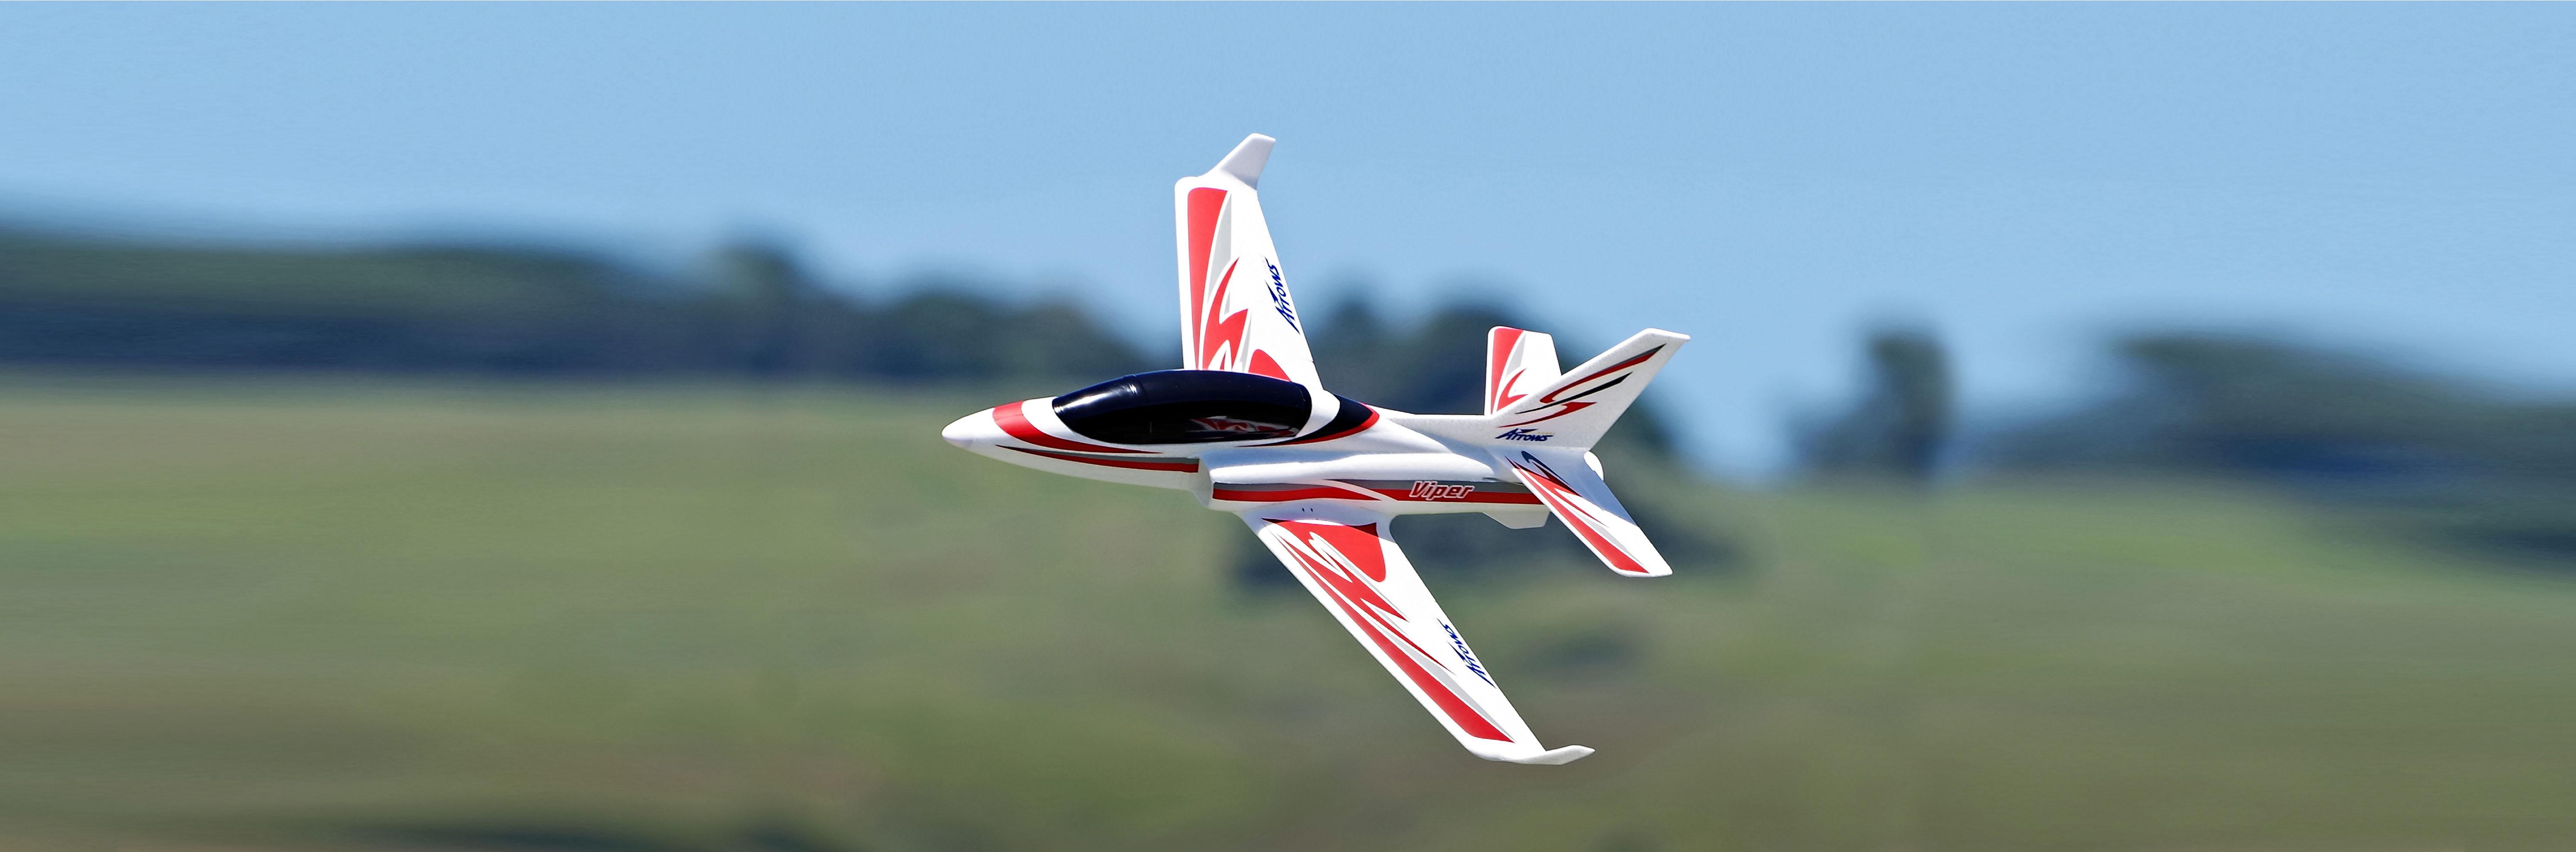 Hobby Zone Rc Planes: Maximizing the Fun: Hobby Zone RC Planes Offer Affordable and Exciting Flying Experiences!